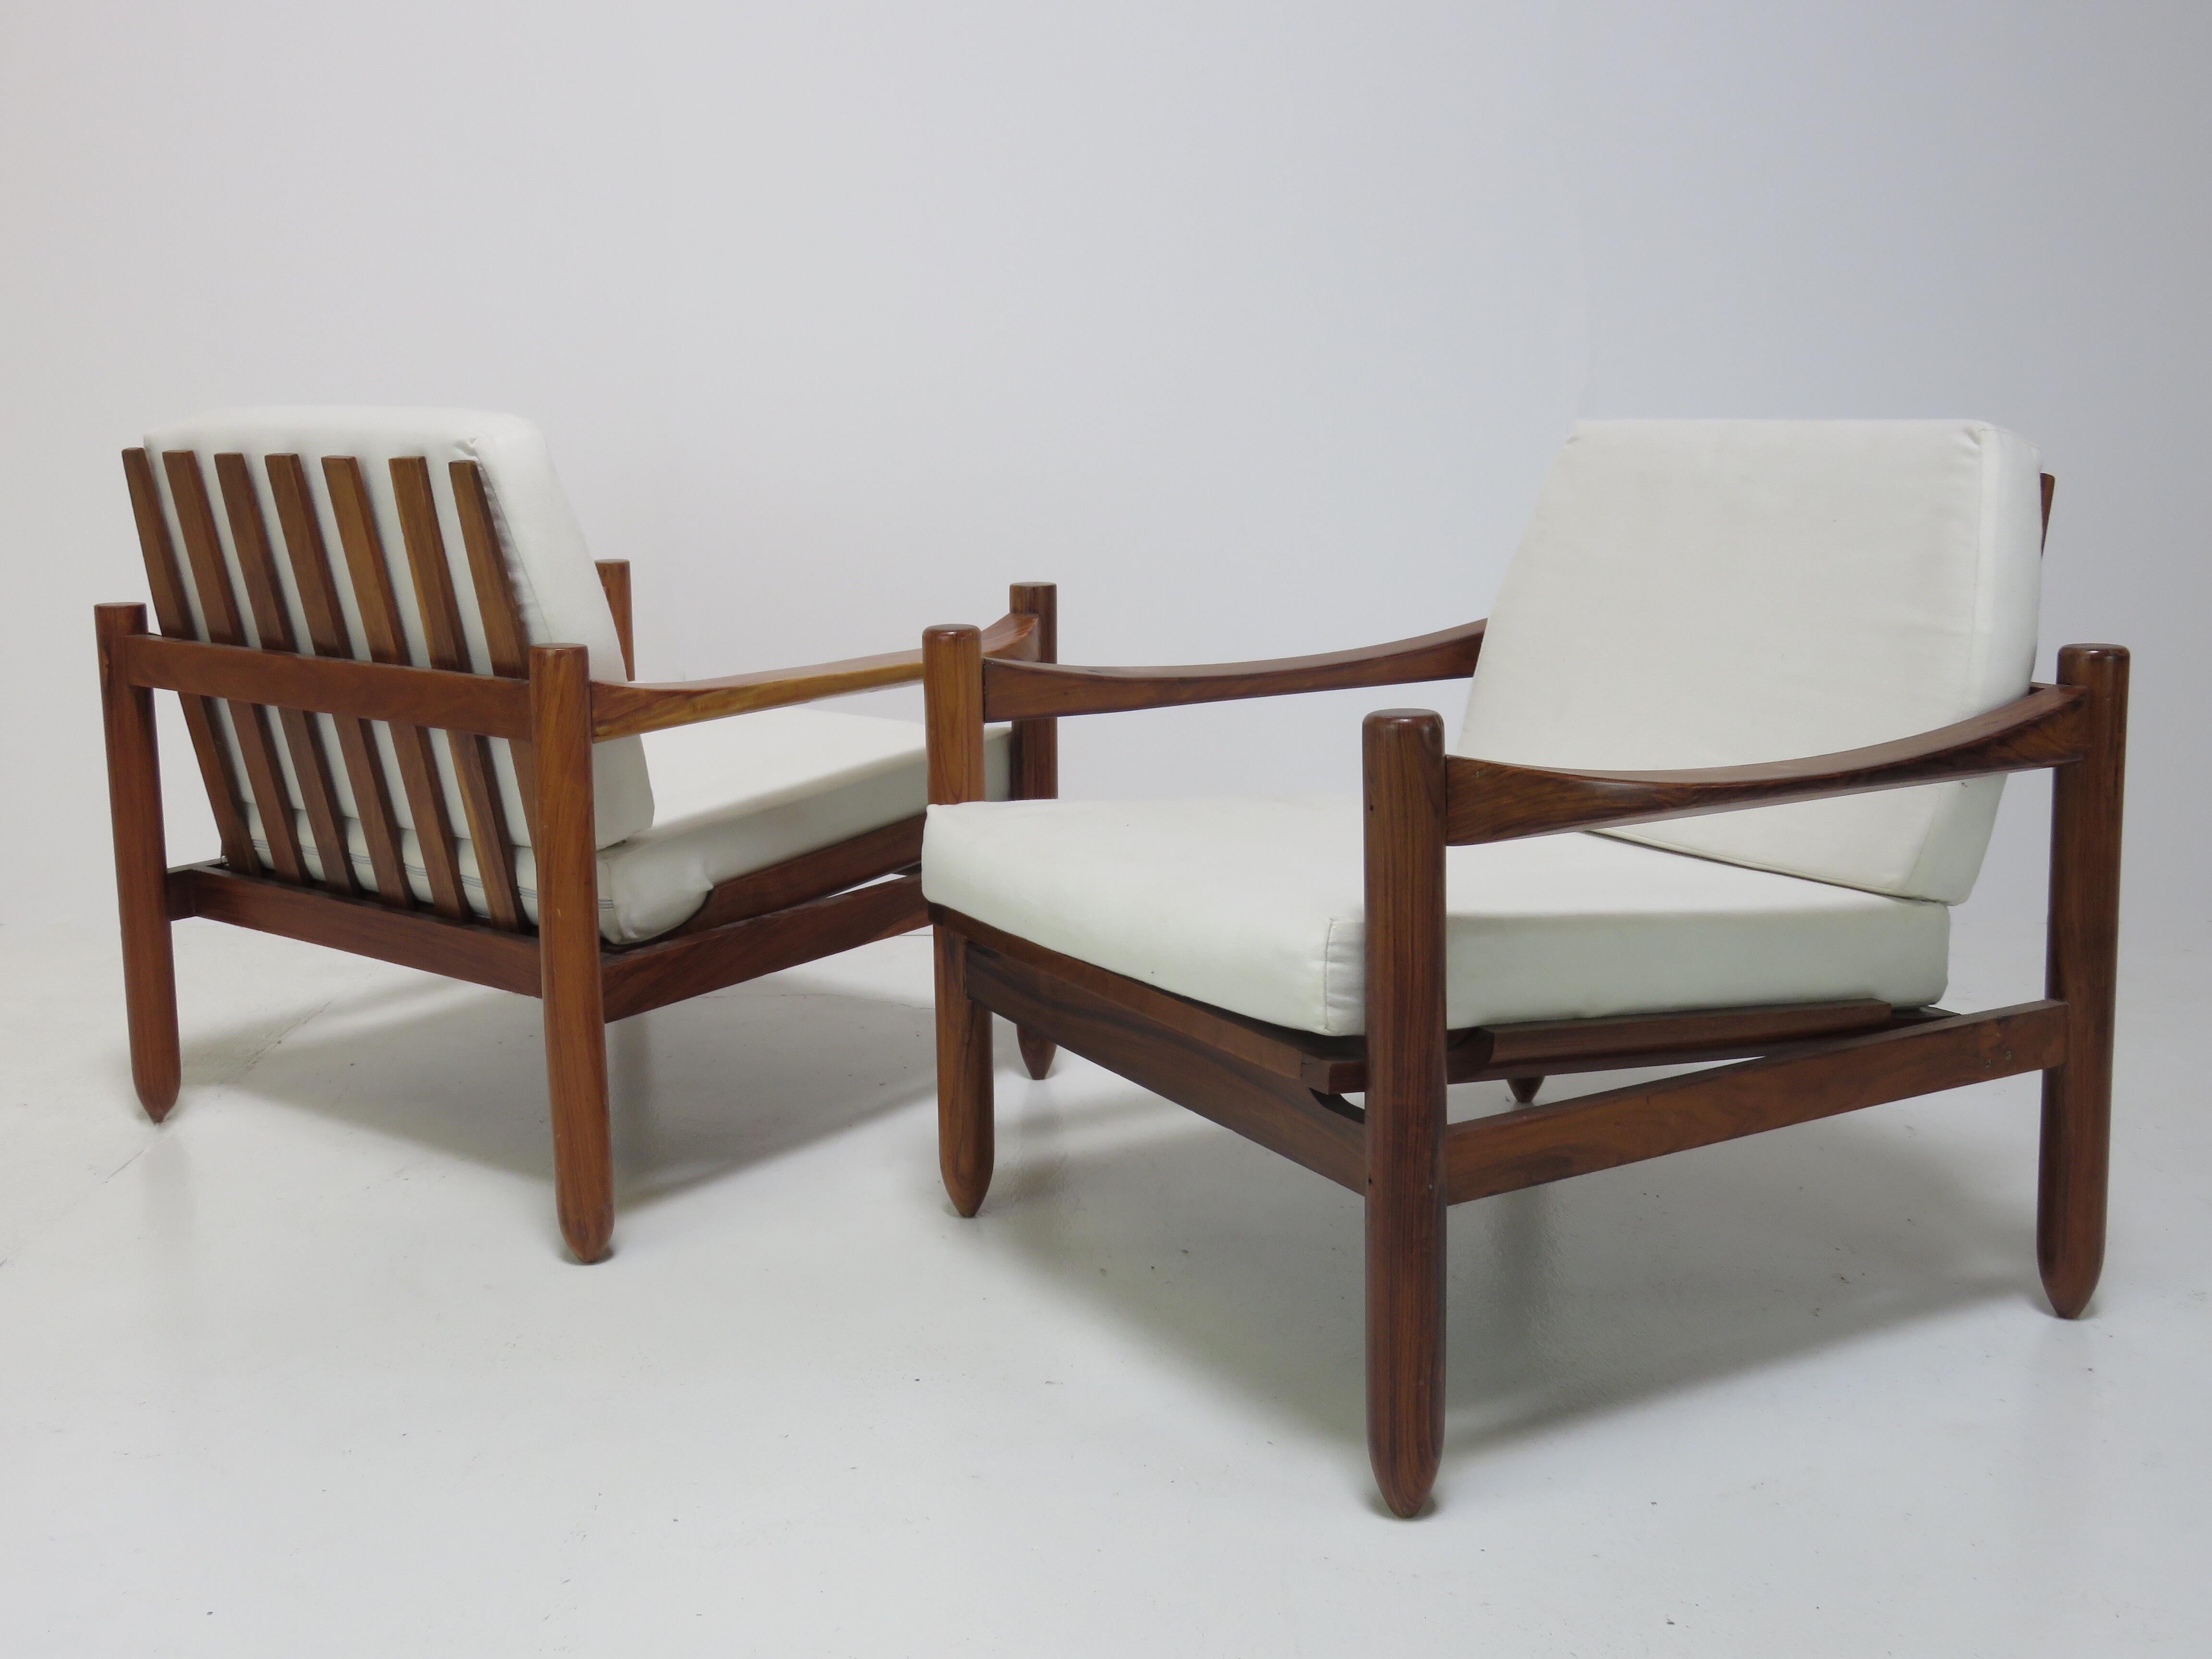 A pair of Brazilian hardwood lounge chairs. Attractive slatted back, cyclindrical legs and curved arms. Includes loose cushions covered in a white fabric.